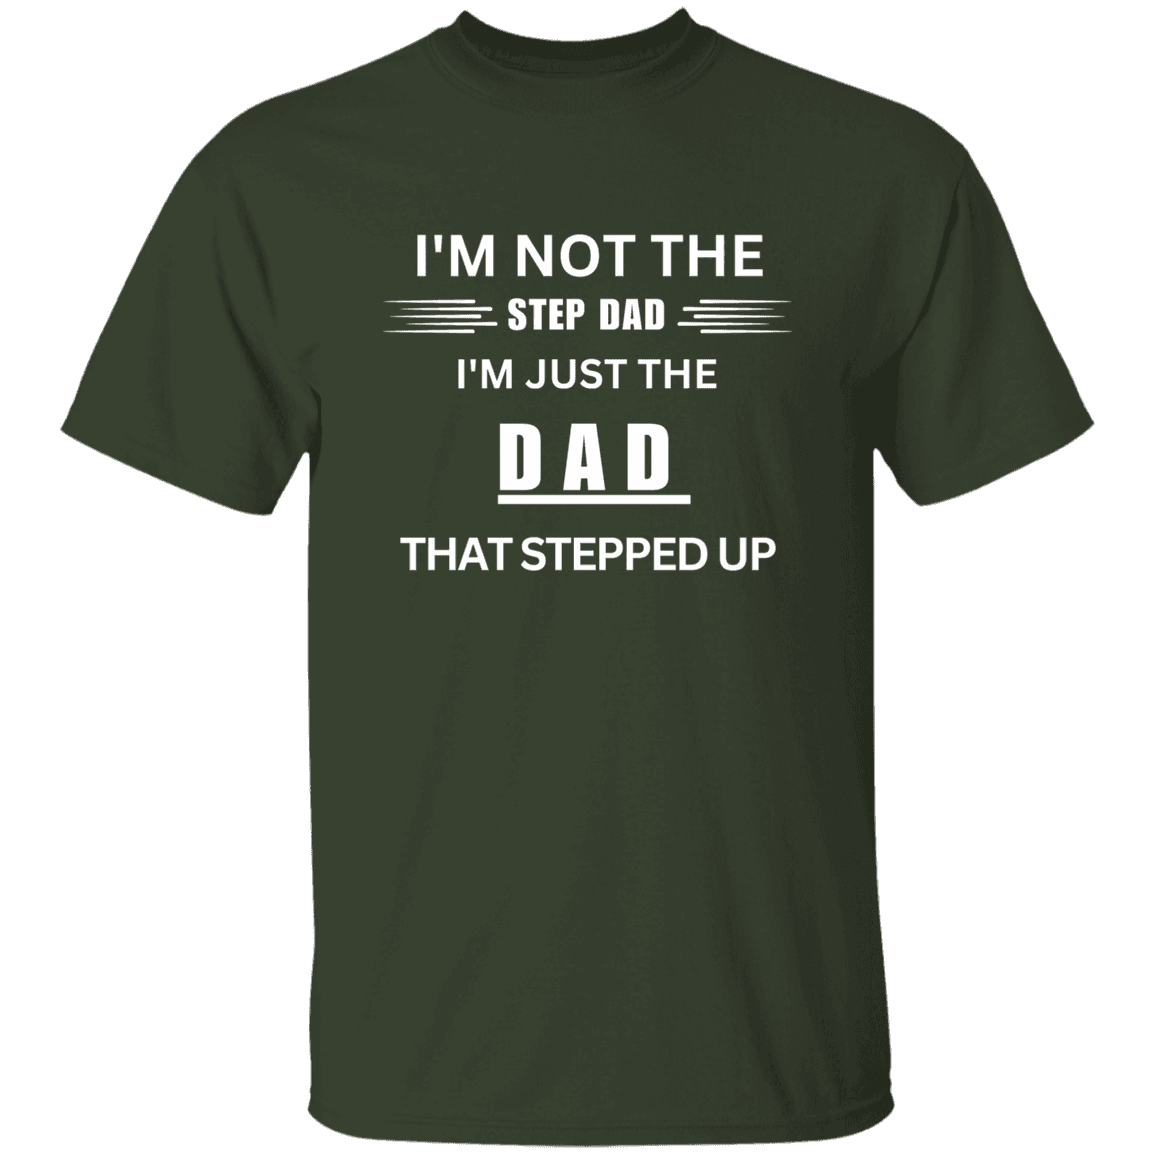 Front of the forest green Stepped Up Dad t-shirt. Material is heavyweight 100% cotton in a classic unisex t-shirt style. Printed in white letters on the chest is the phrase: "I'm not the Step Dad, I'm just the DAD that stepped up"